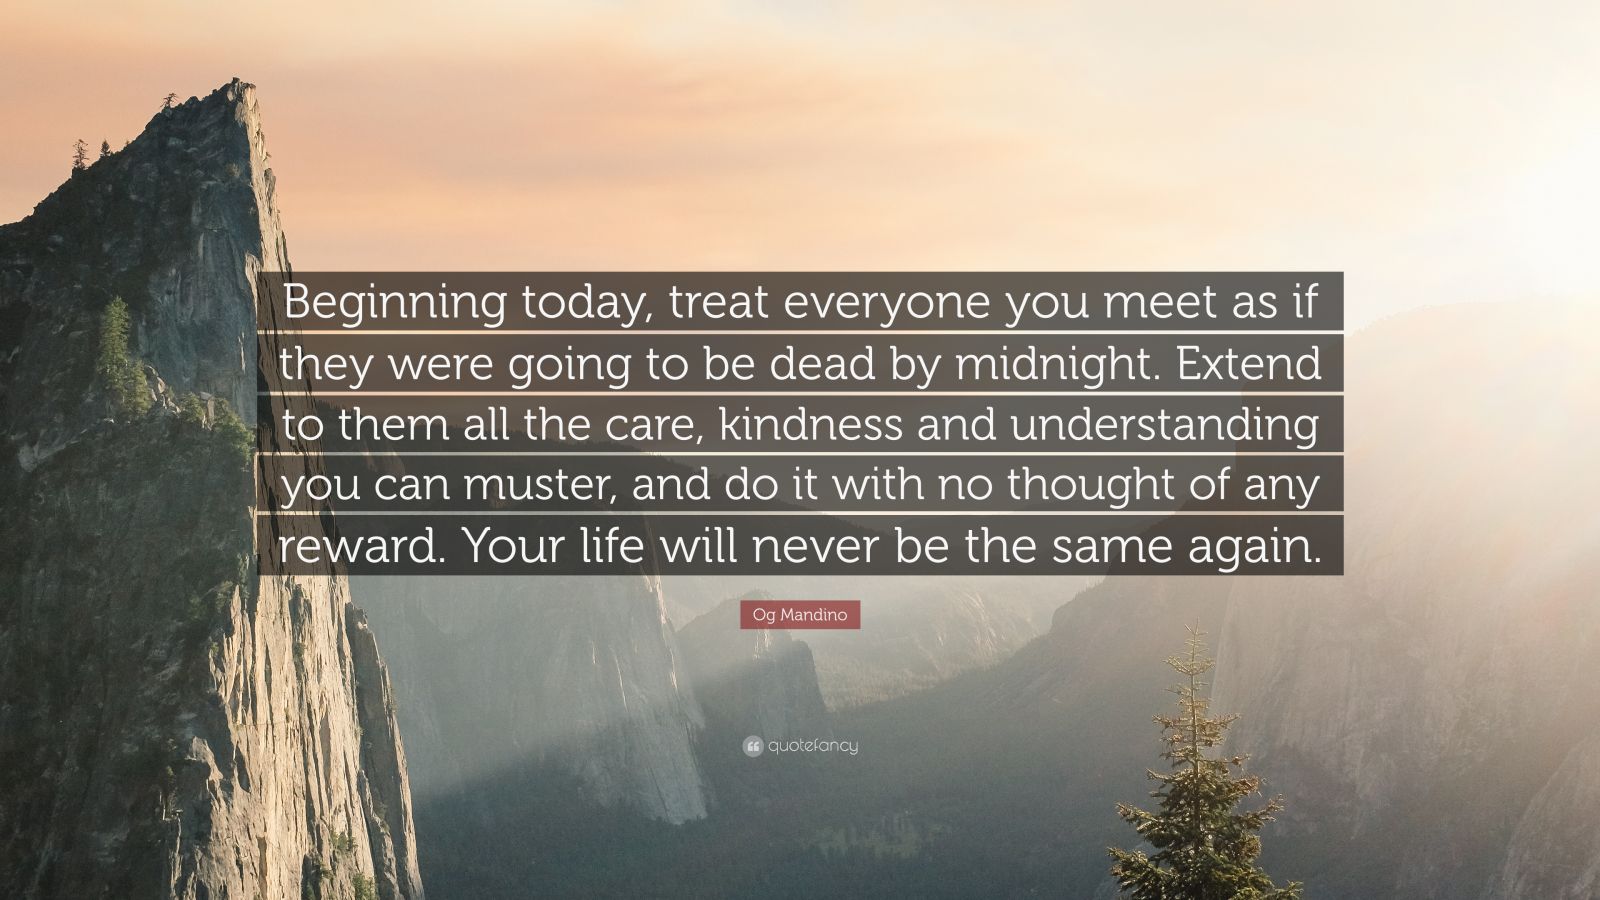 2103756 Og Mandino Quote Beginning today treat everyone you meet as if